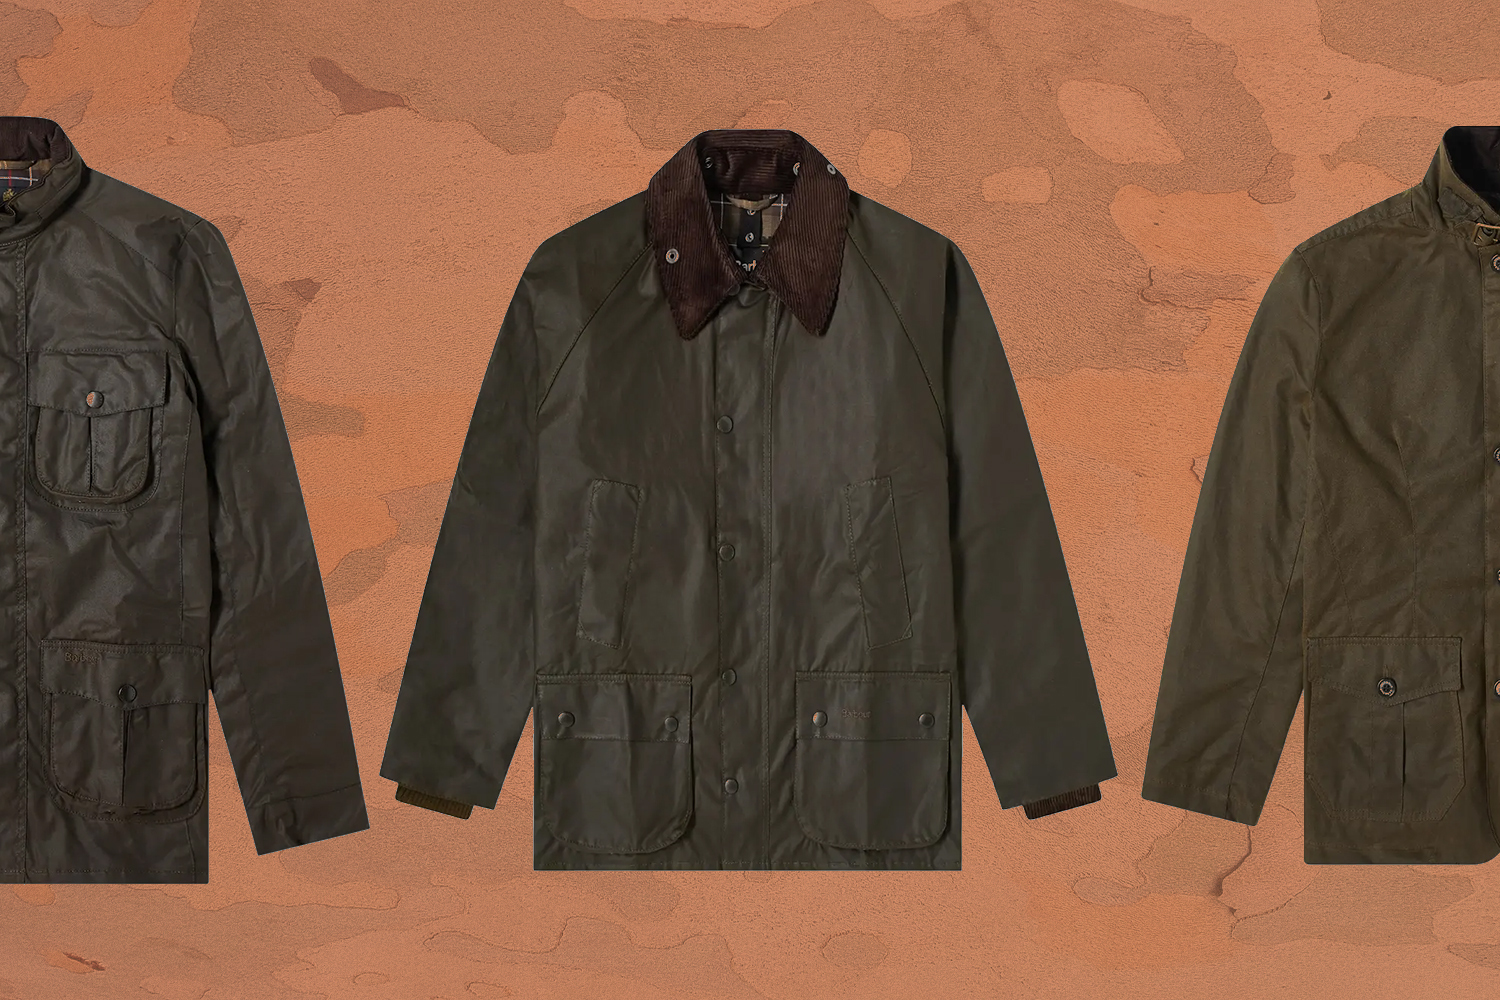 Geven shuttle Manier How to Choose the Best Barbour Jacket Style For You - InsideHook